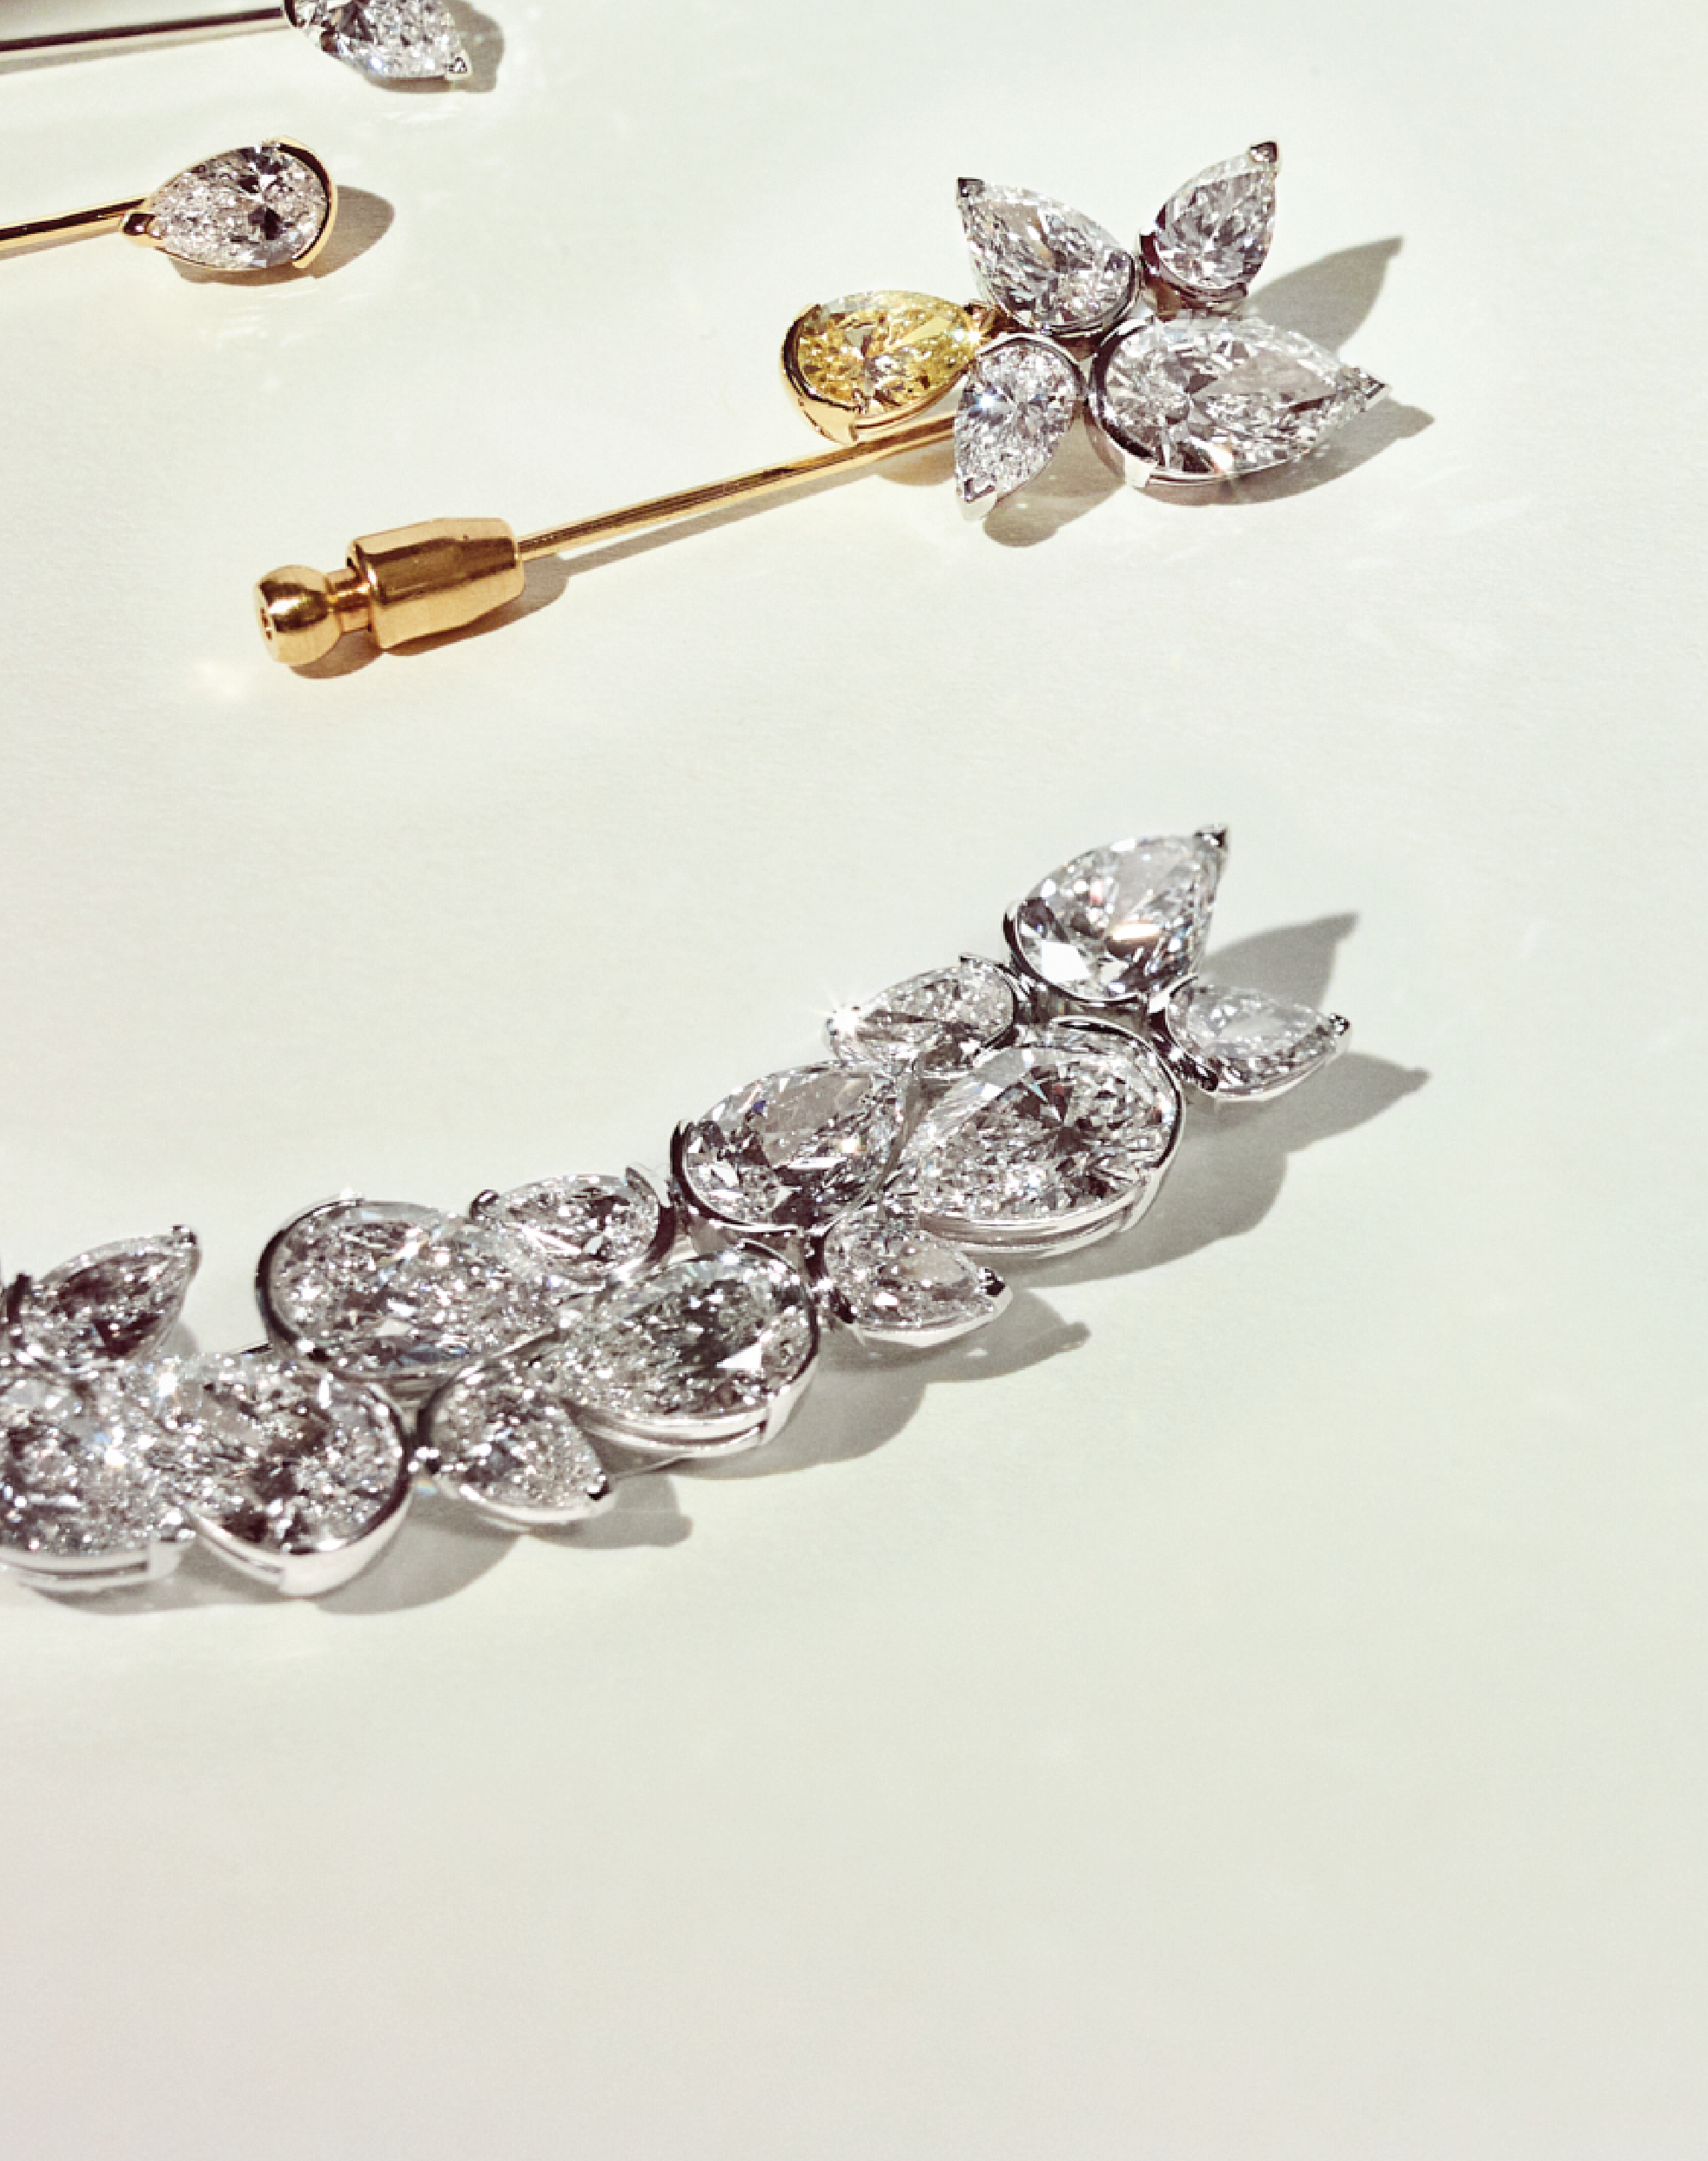 Pete Davidson's pieces from the 2022 Met Gala. Pete wore a custom lapel pin from Or & Elle - the Branche d'Arbre - which was made with pear-shaped diamonds (15 total carat weight), all of which were D color, IF/ VVS clarity. Or & Elle specializes in creating the most iconic custom pieces for all occasions.